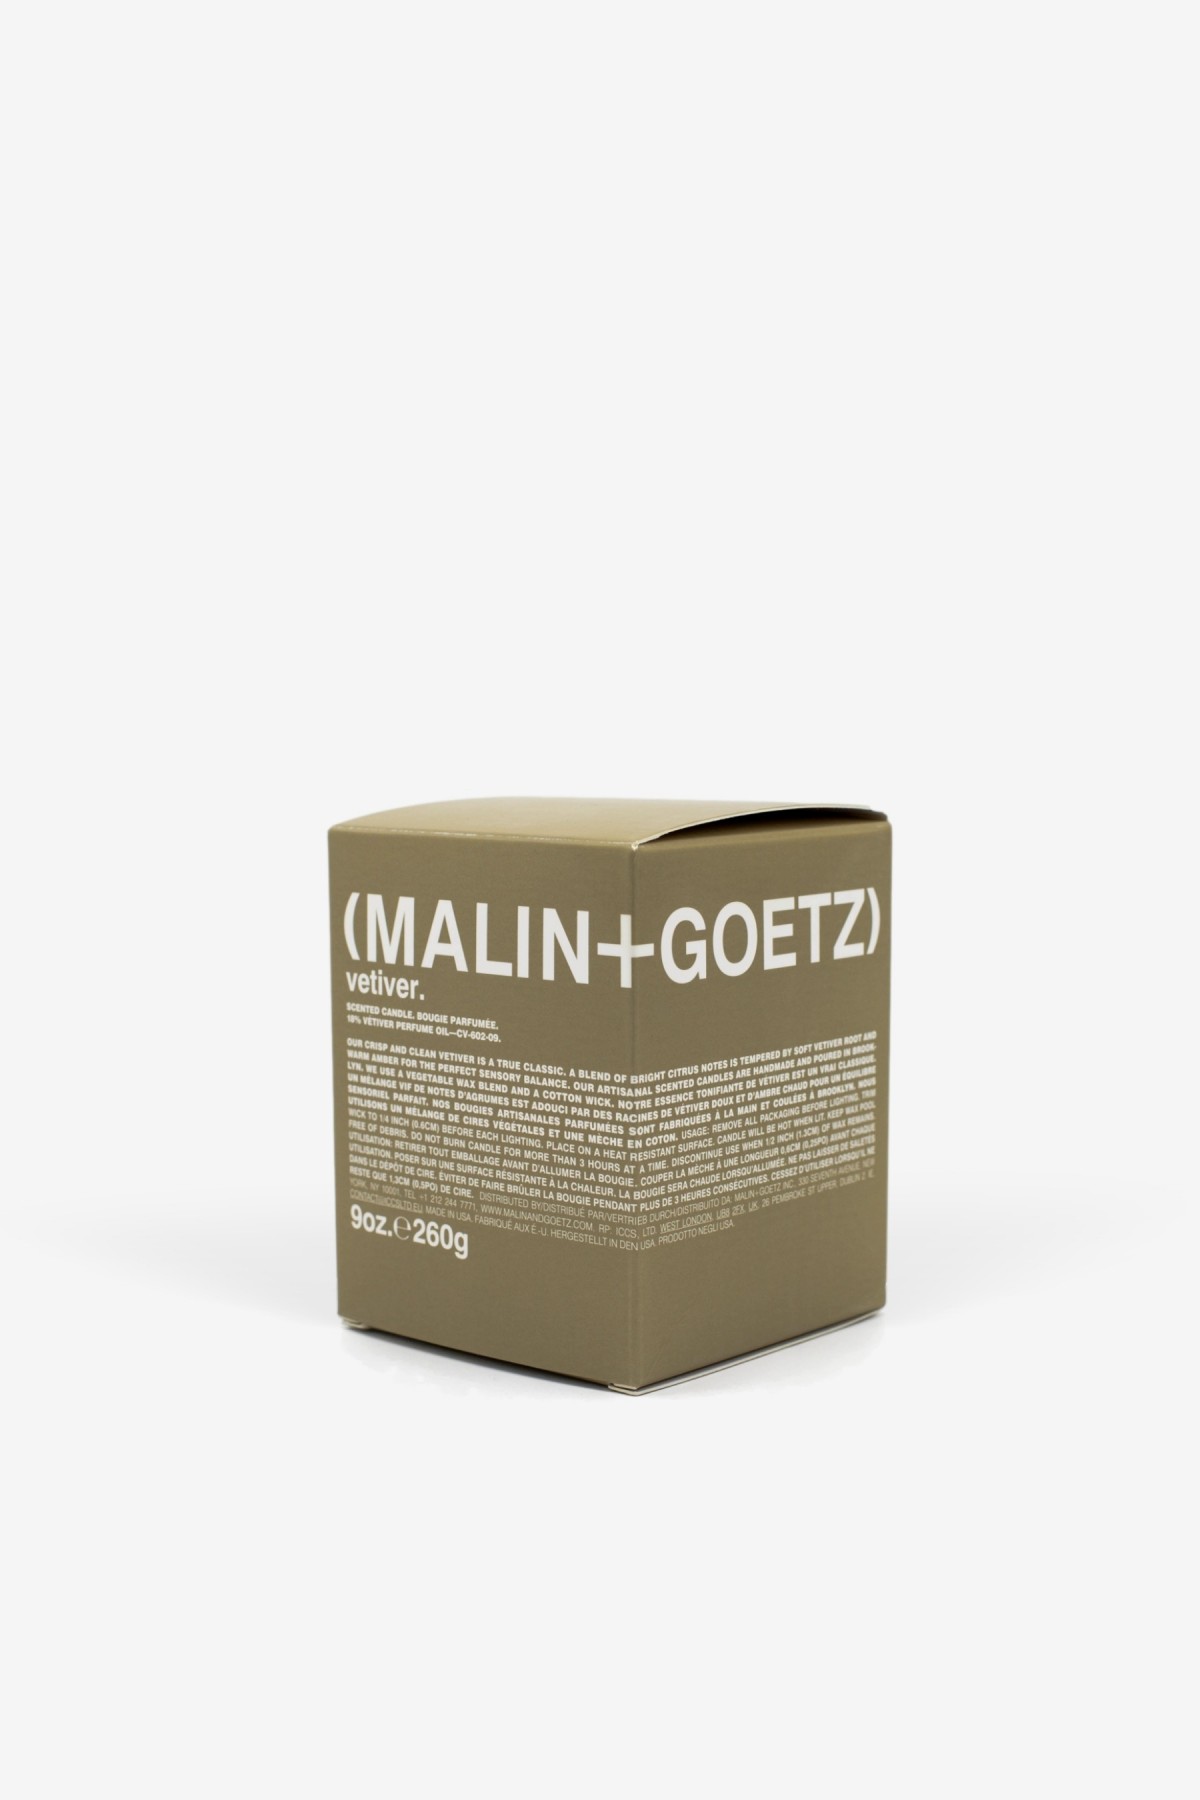 Malin+Goetz Vetiver Candle 260g in 